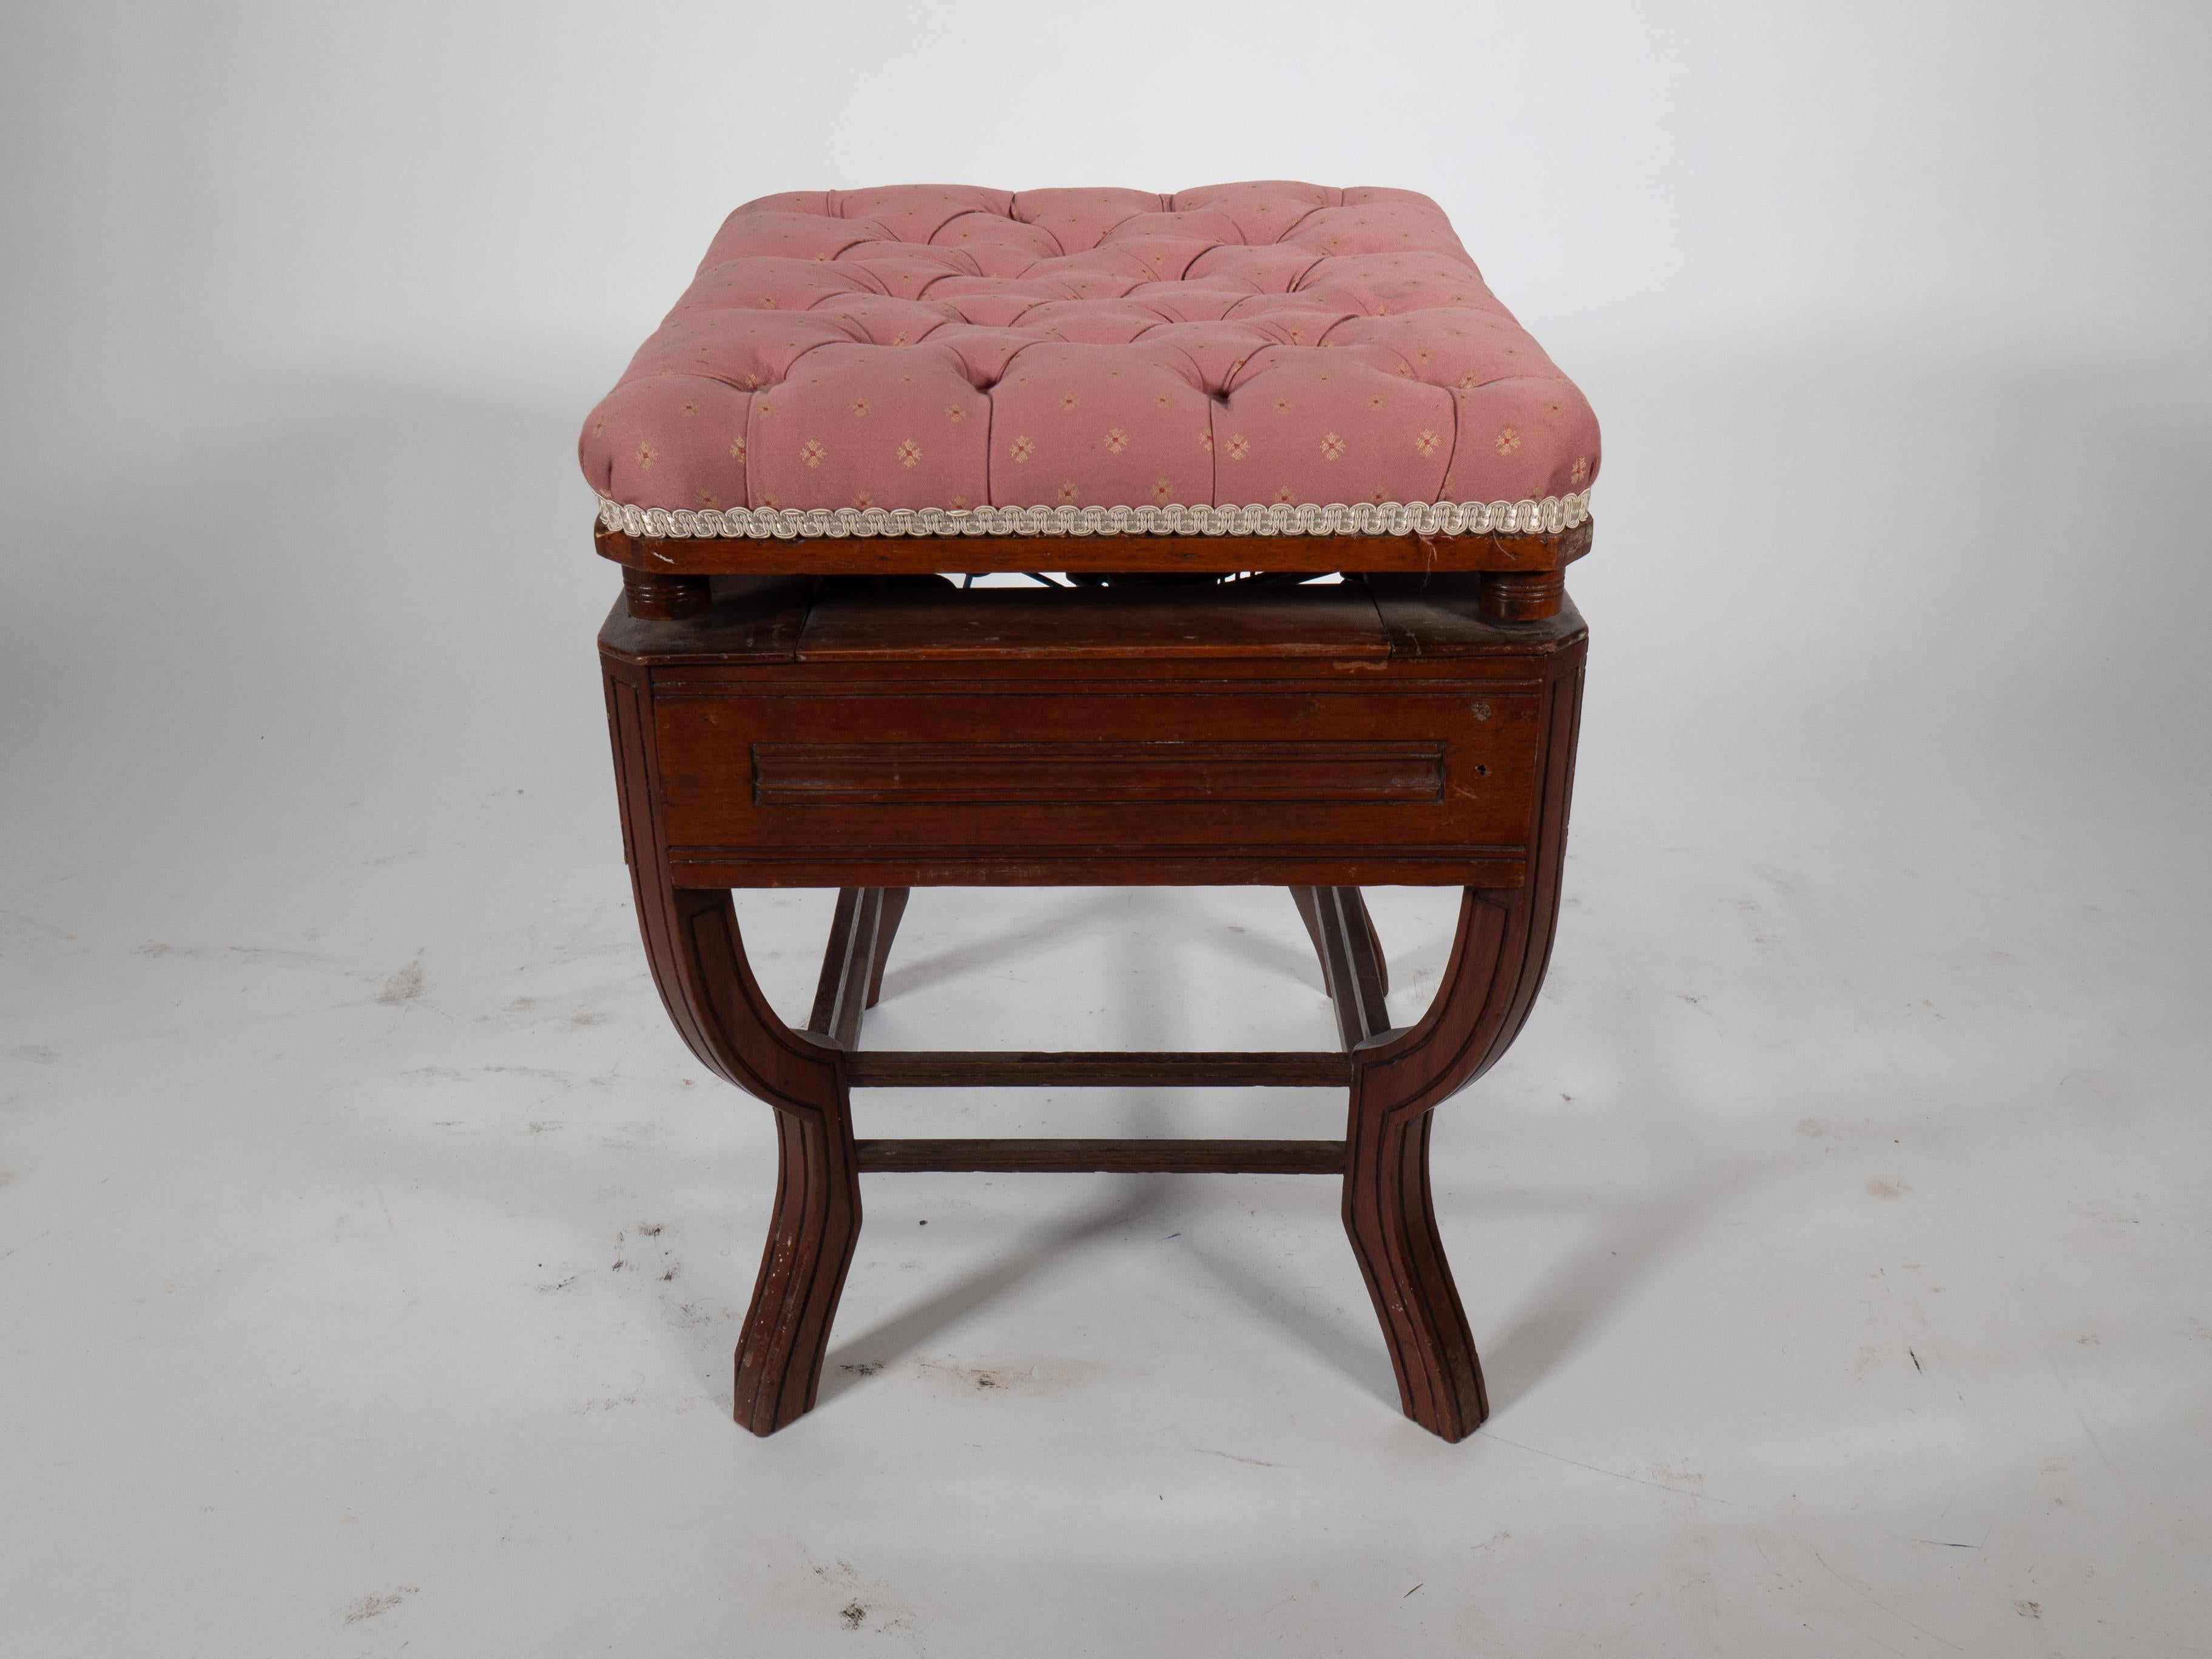 Jas Shoolbred. An Aesthetic Movement adjustable height piano stool with carved florettes and line scribed decoration to the seat and to the shaped legs, united by a double stretcher. This has a BSA motor bike company mechanical height adjusting